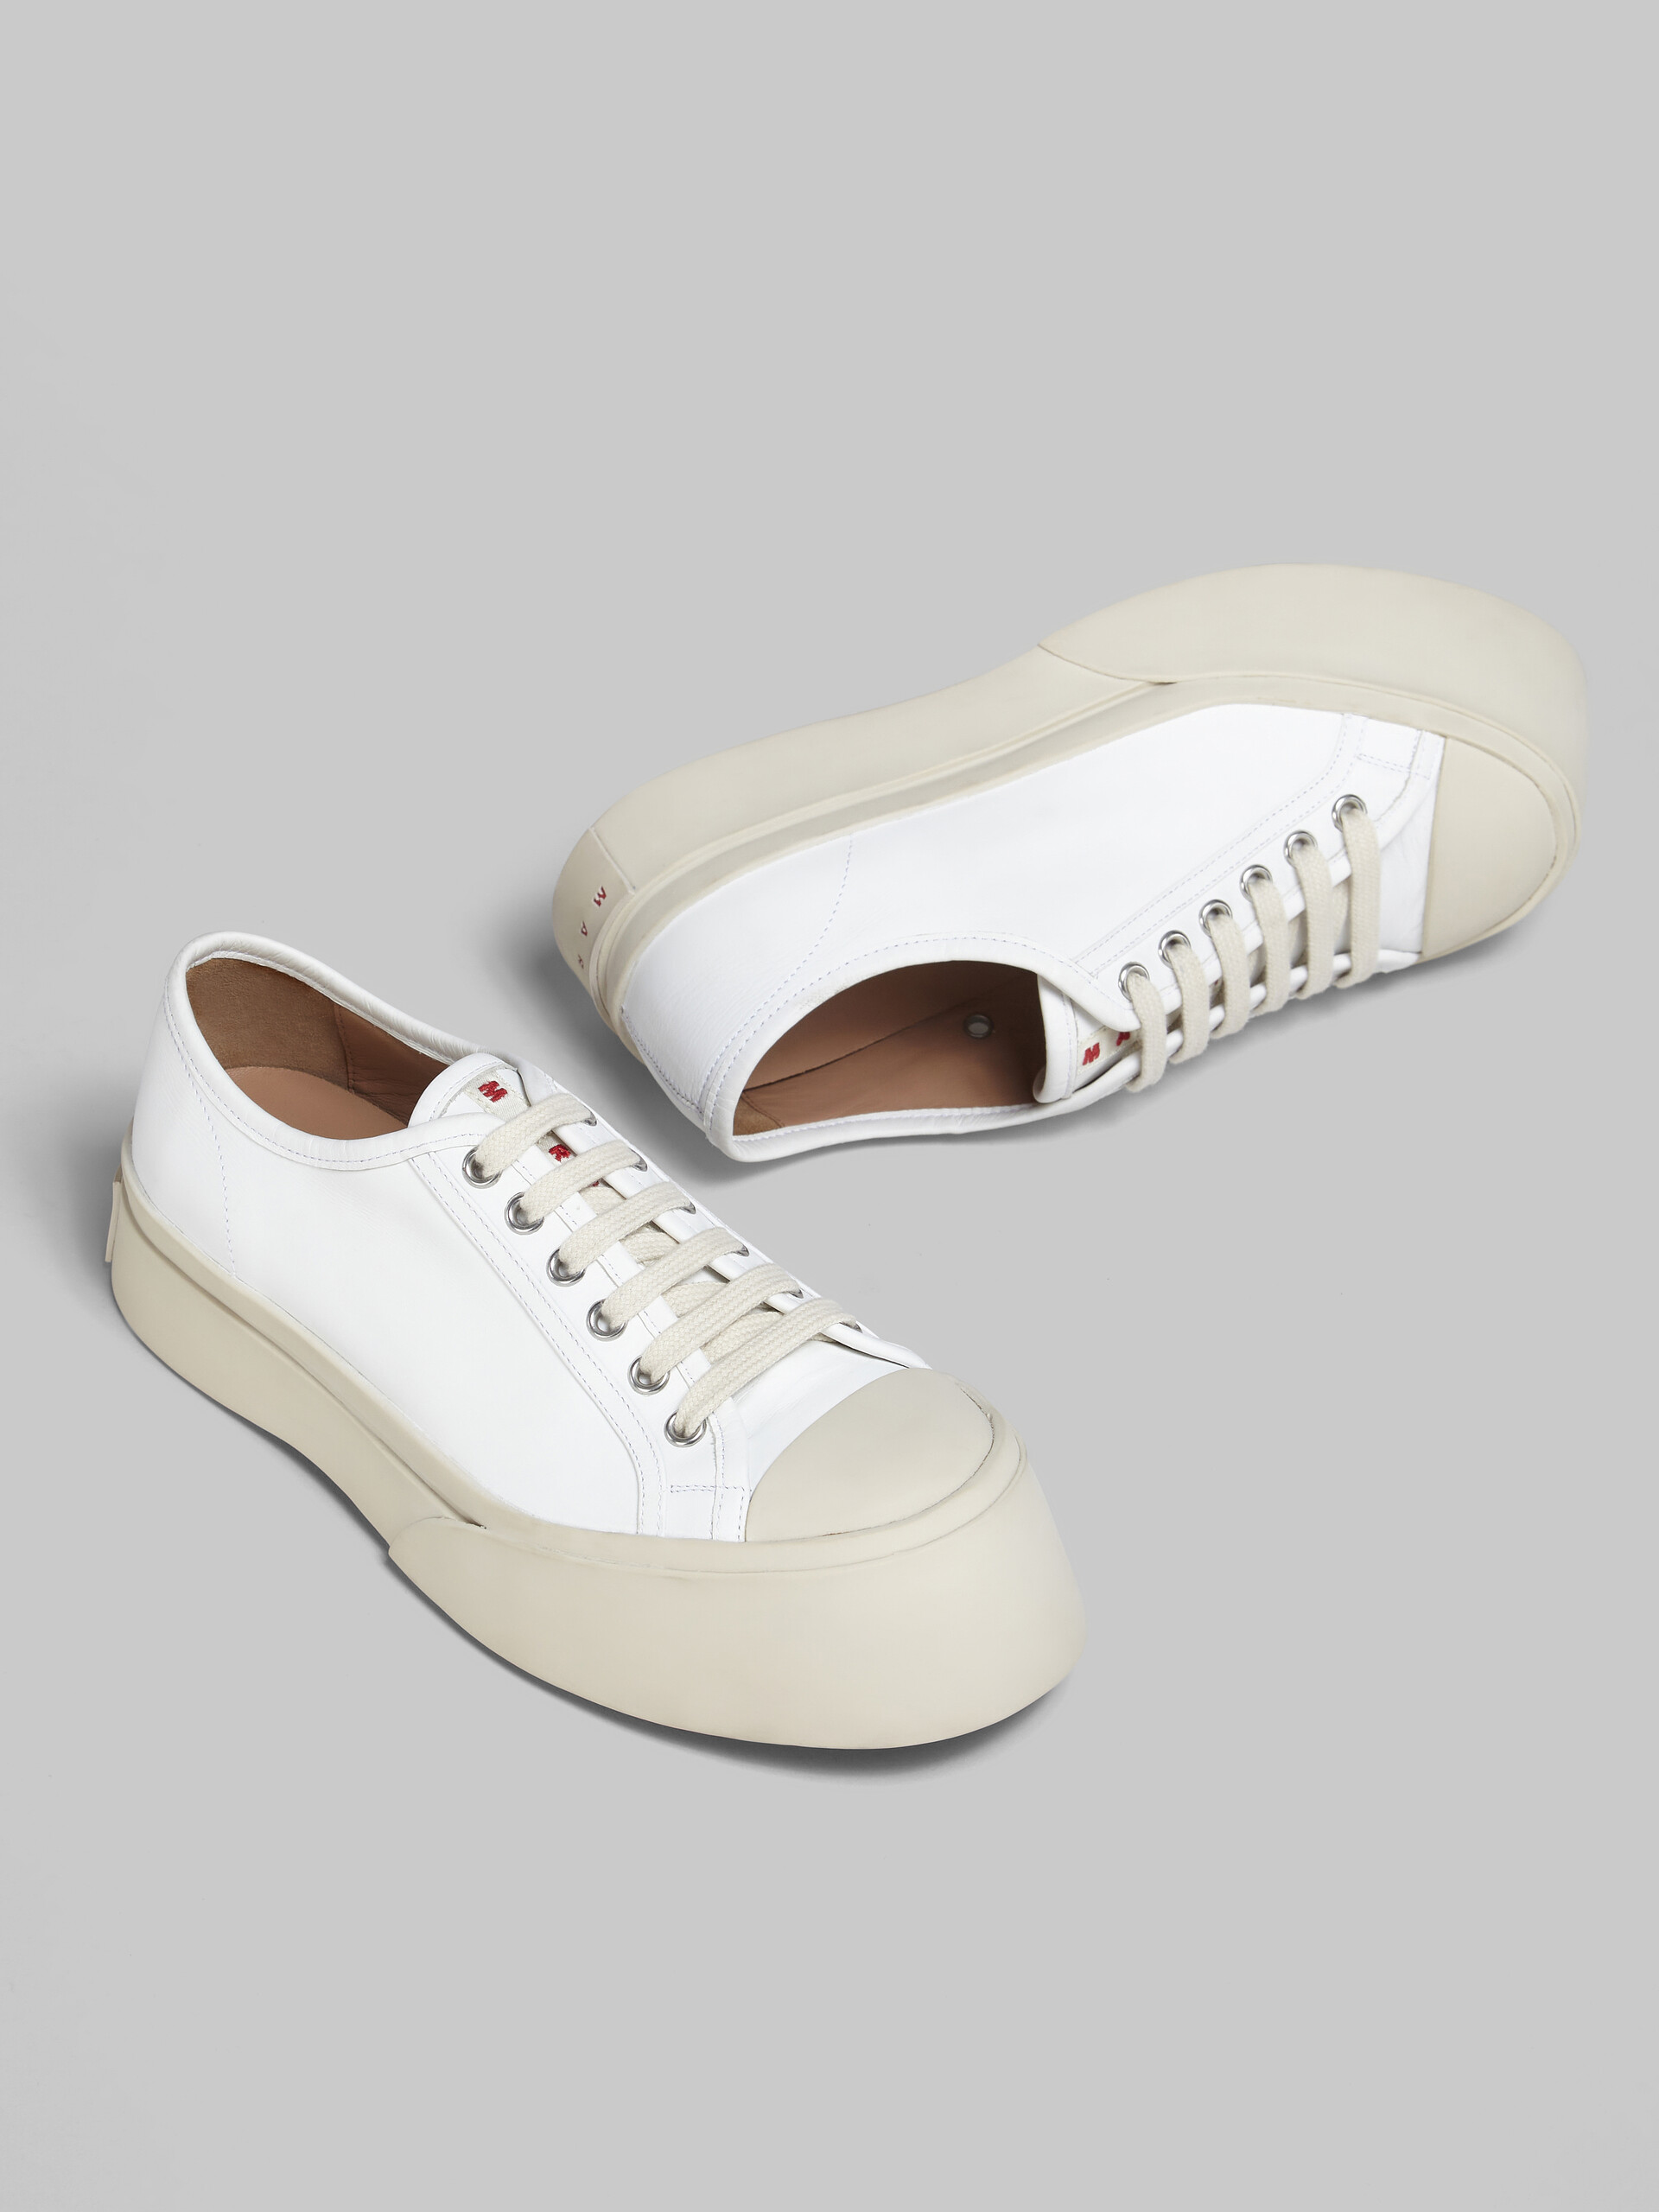 White nappa leather PABLO lace-up sneaker